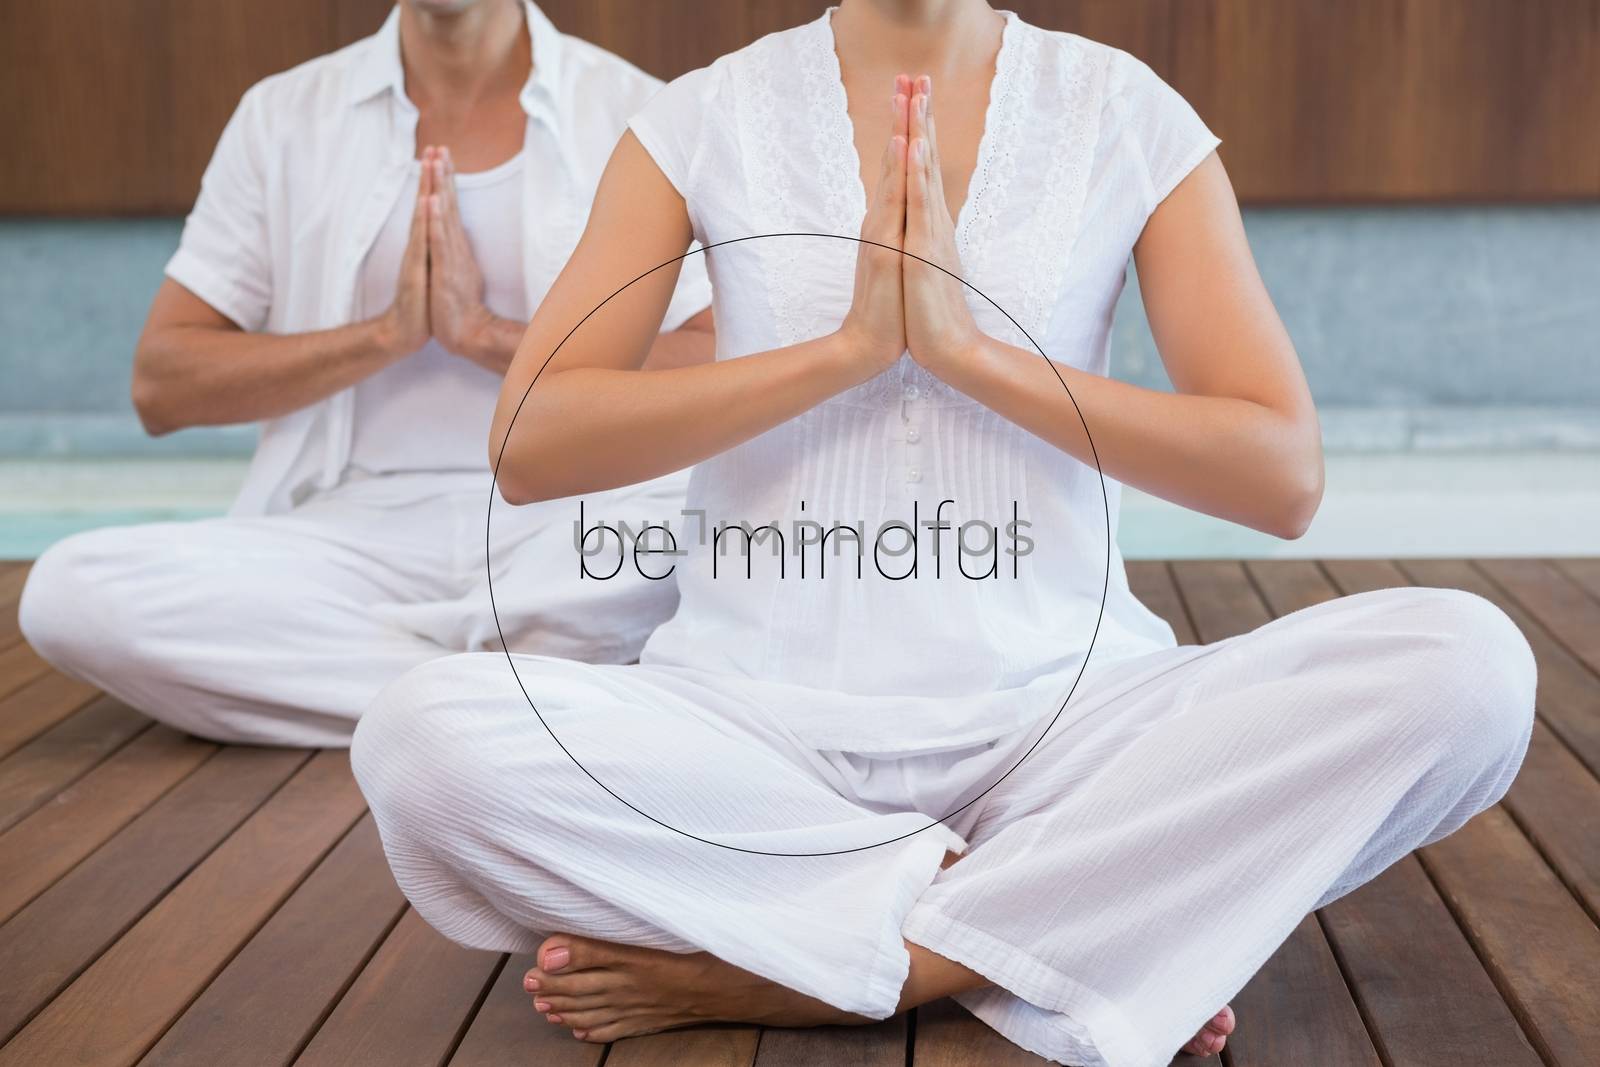 Couple performing yoga on a wooden floor